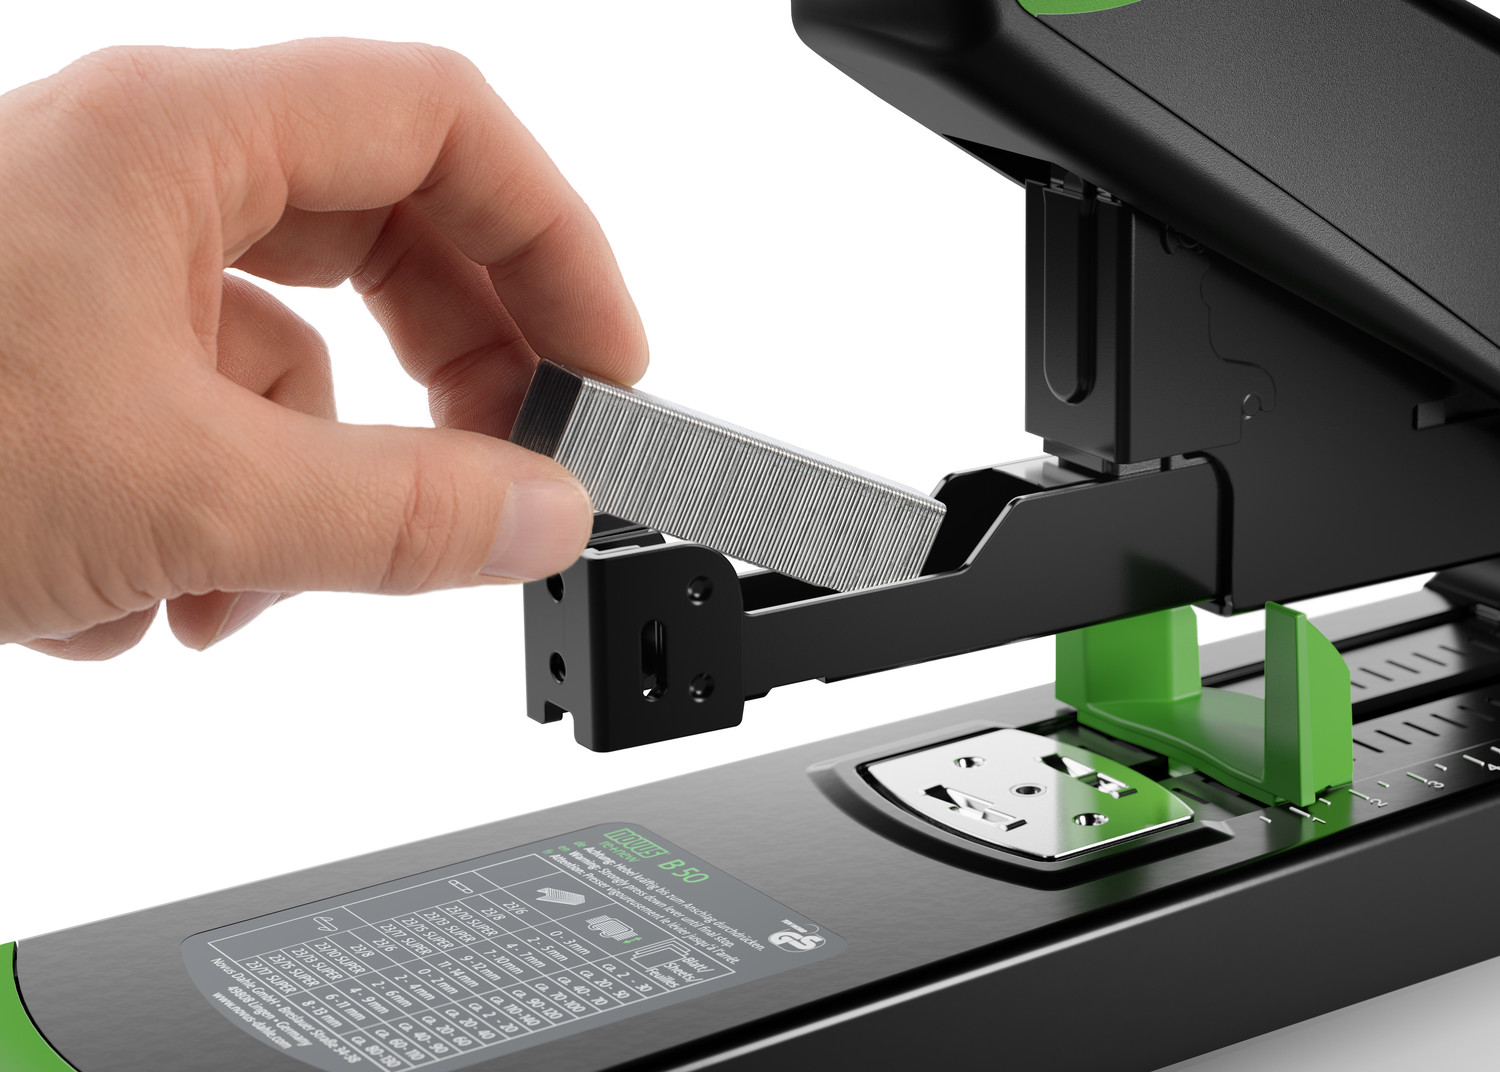 Press button loading system with double staple guide for precision stapling